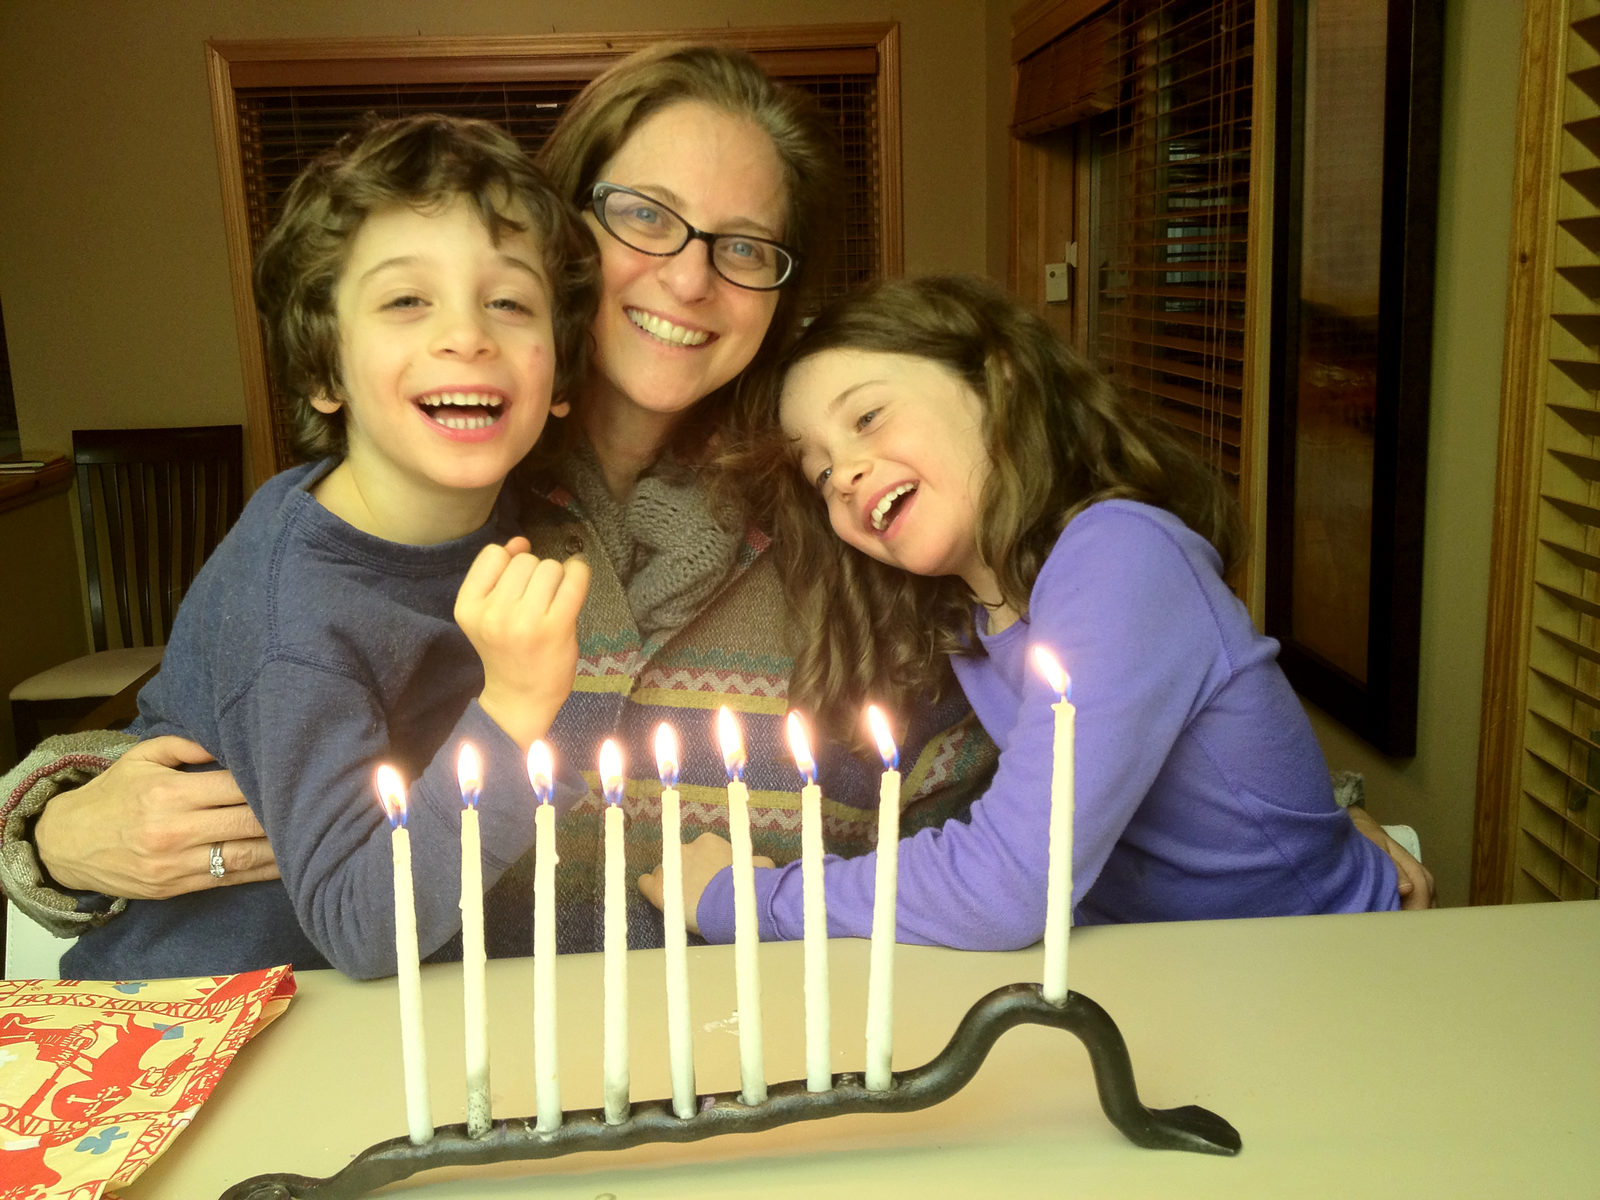 Michelle and her children on the 8th night of Chanukah.